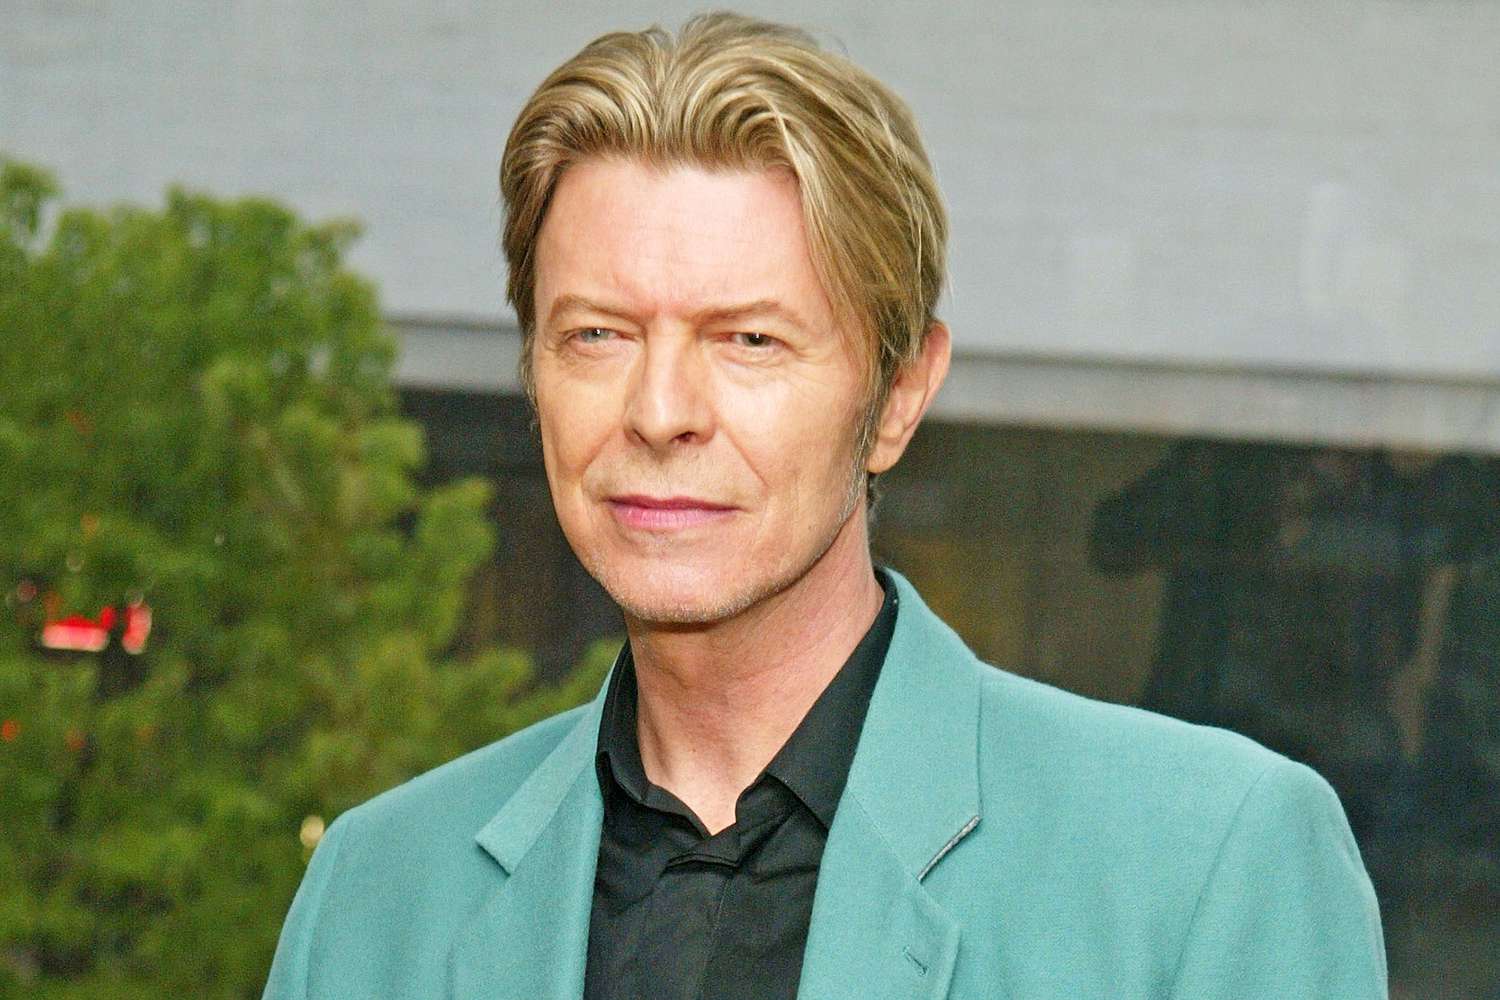 David Bowie dances with daughter in sweet throwback video